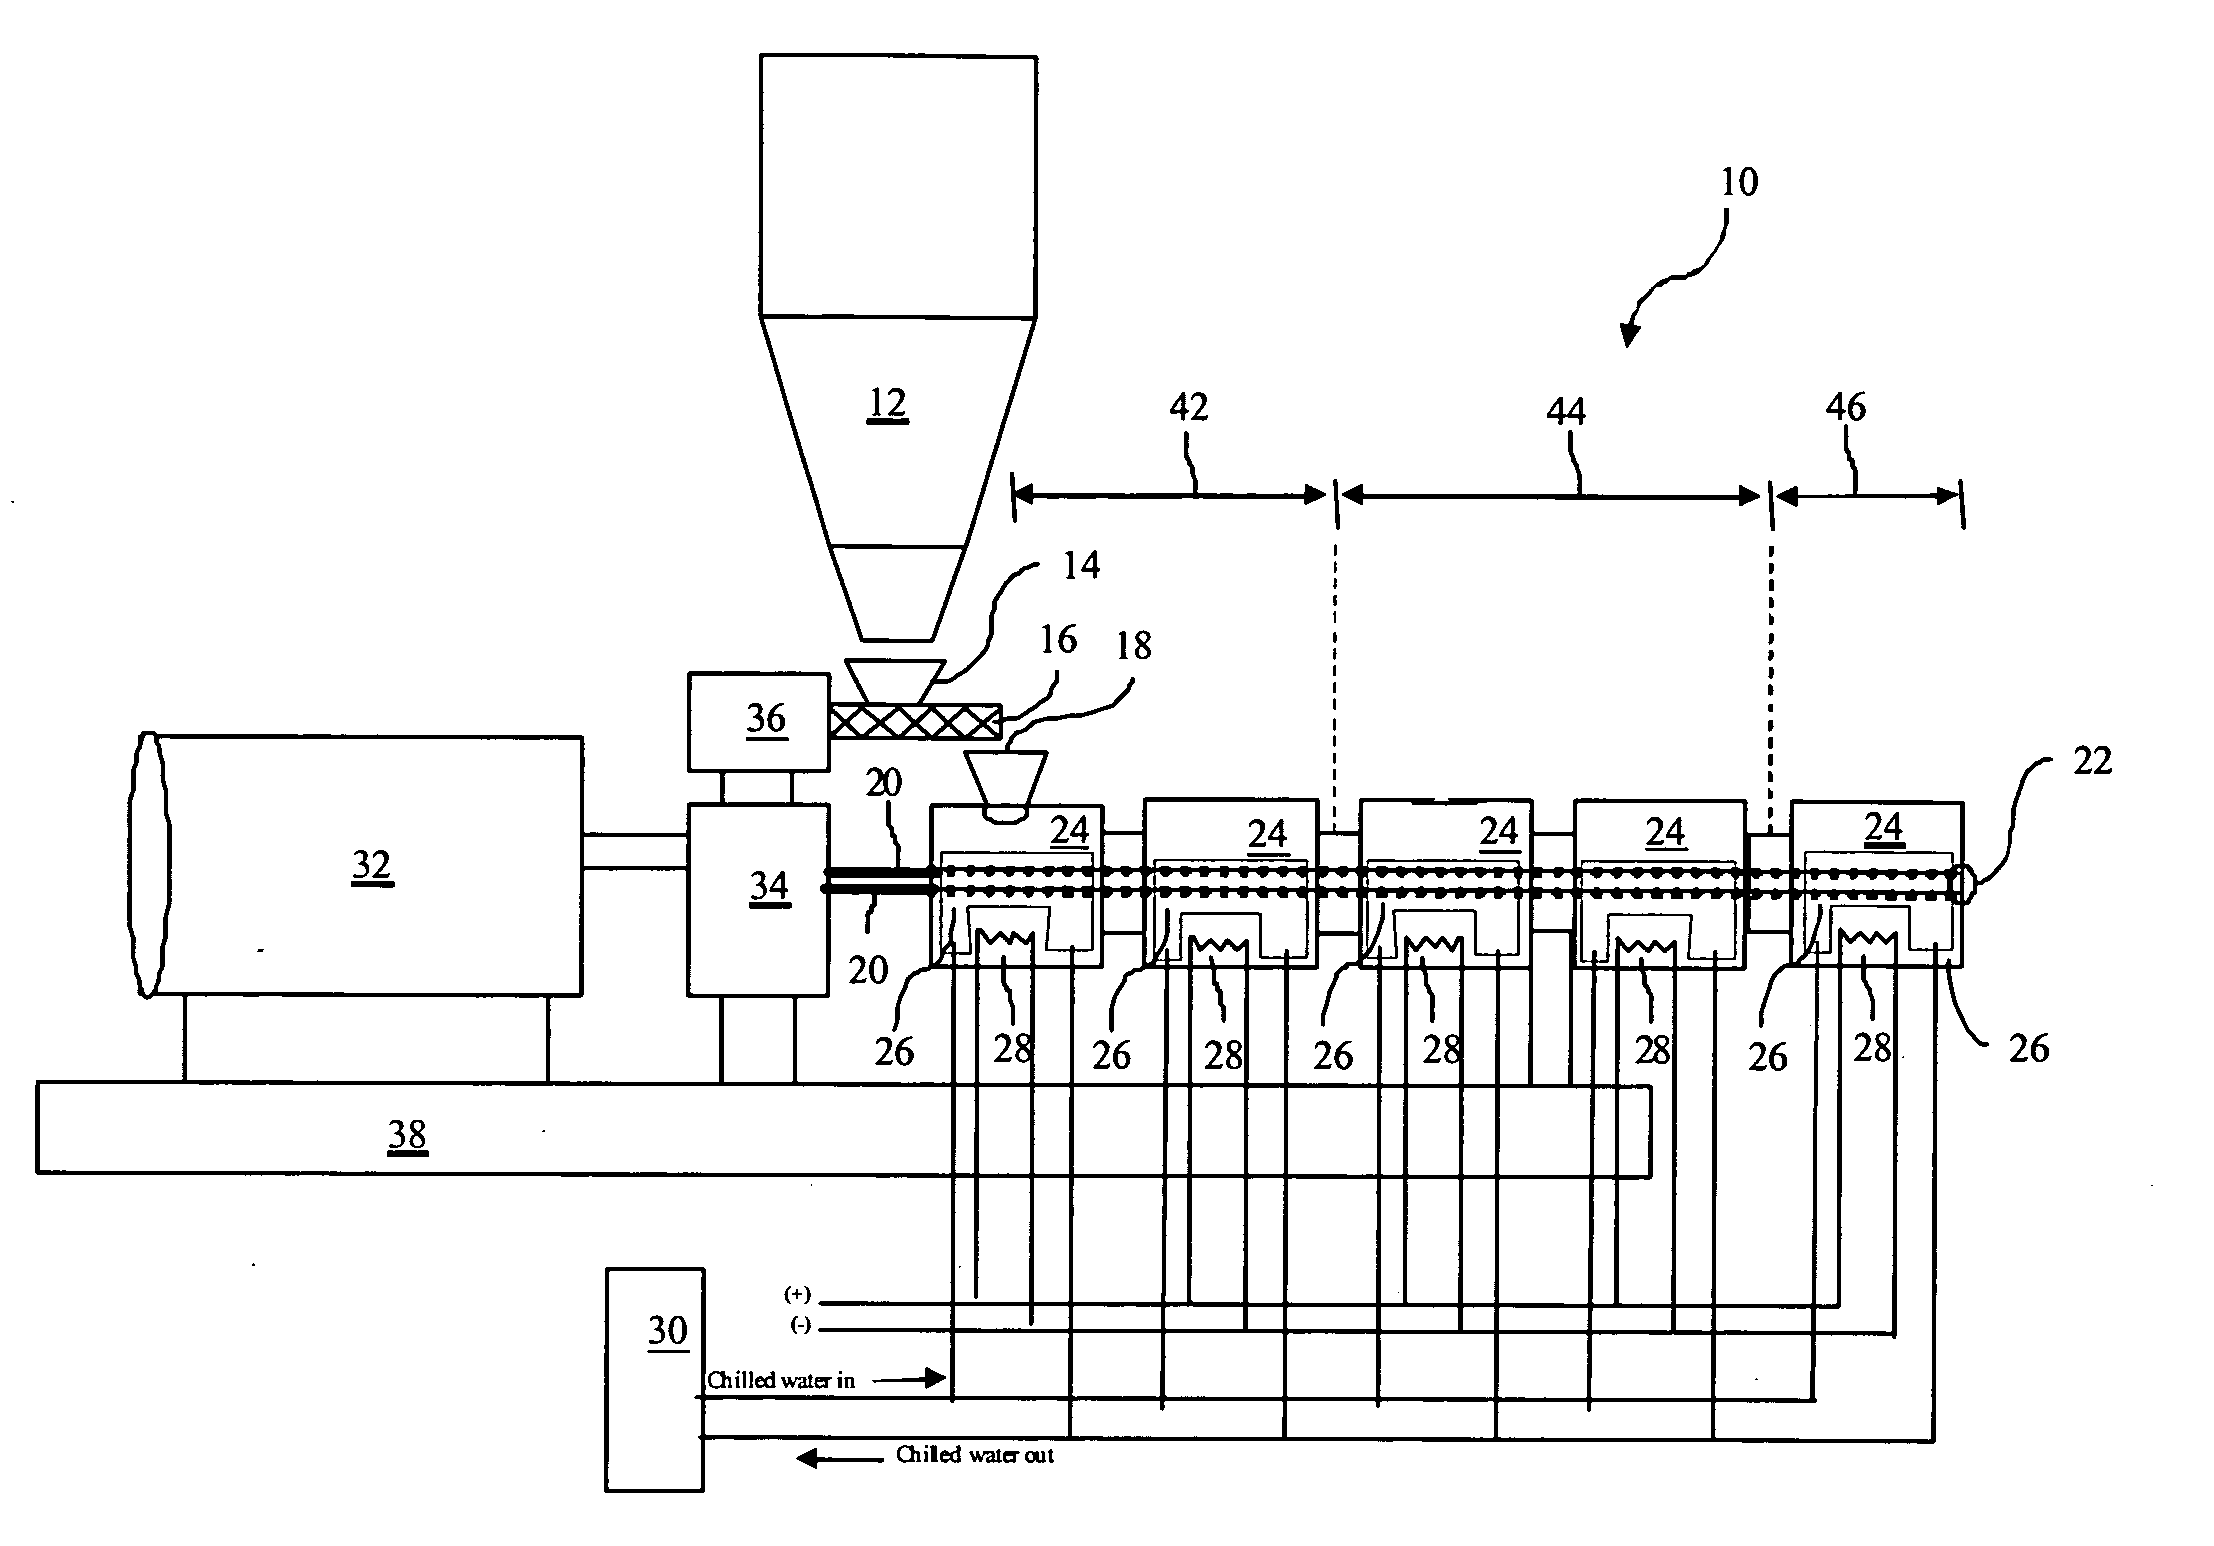 Focused heat extrusion process for manufacturing powder coating compositions